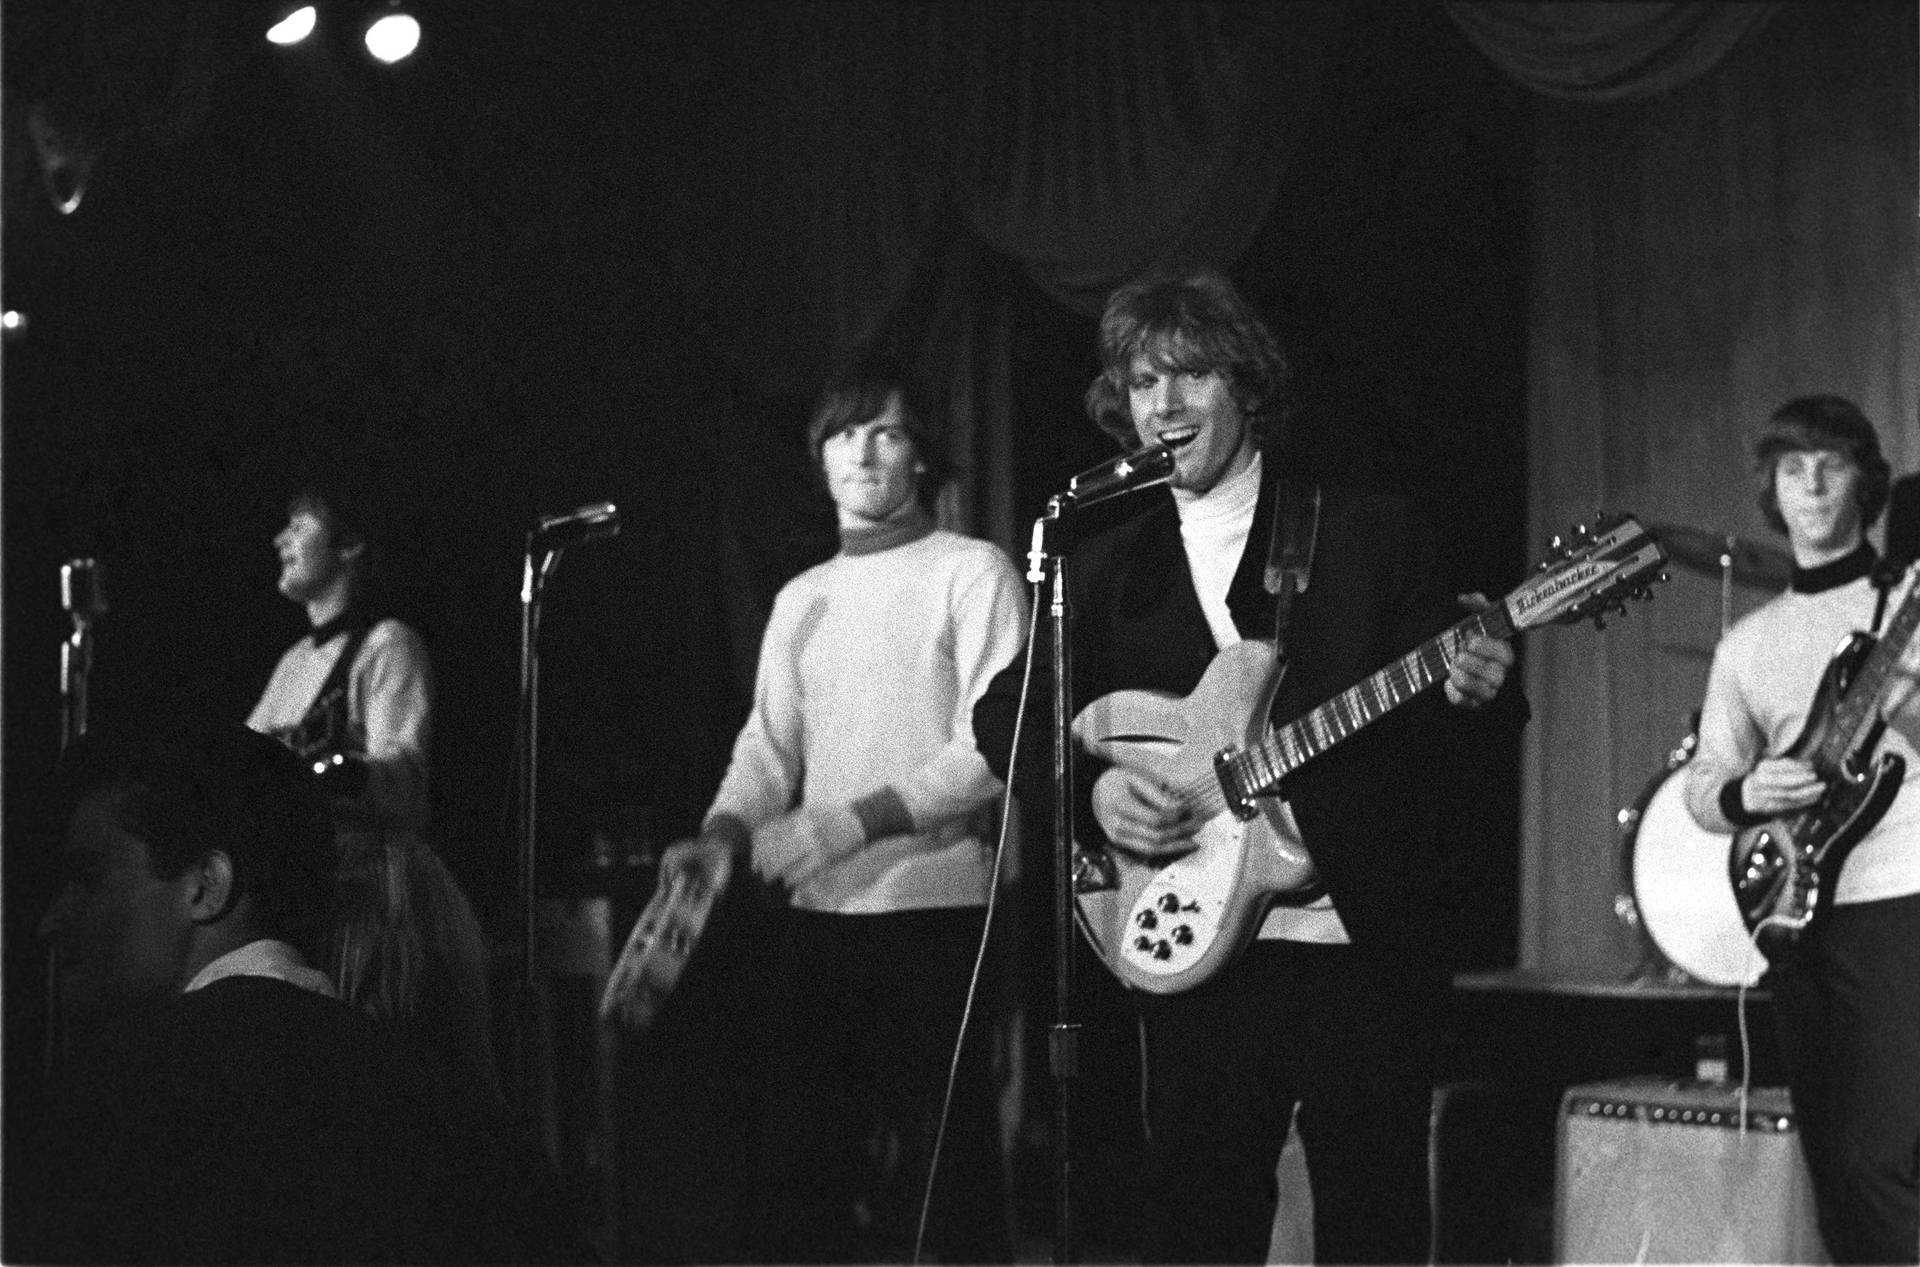 - Byrds Rockband Uppträdande (as A Title For A Wallpaper With A Live Photo Of The Band Performing) Wallpaper